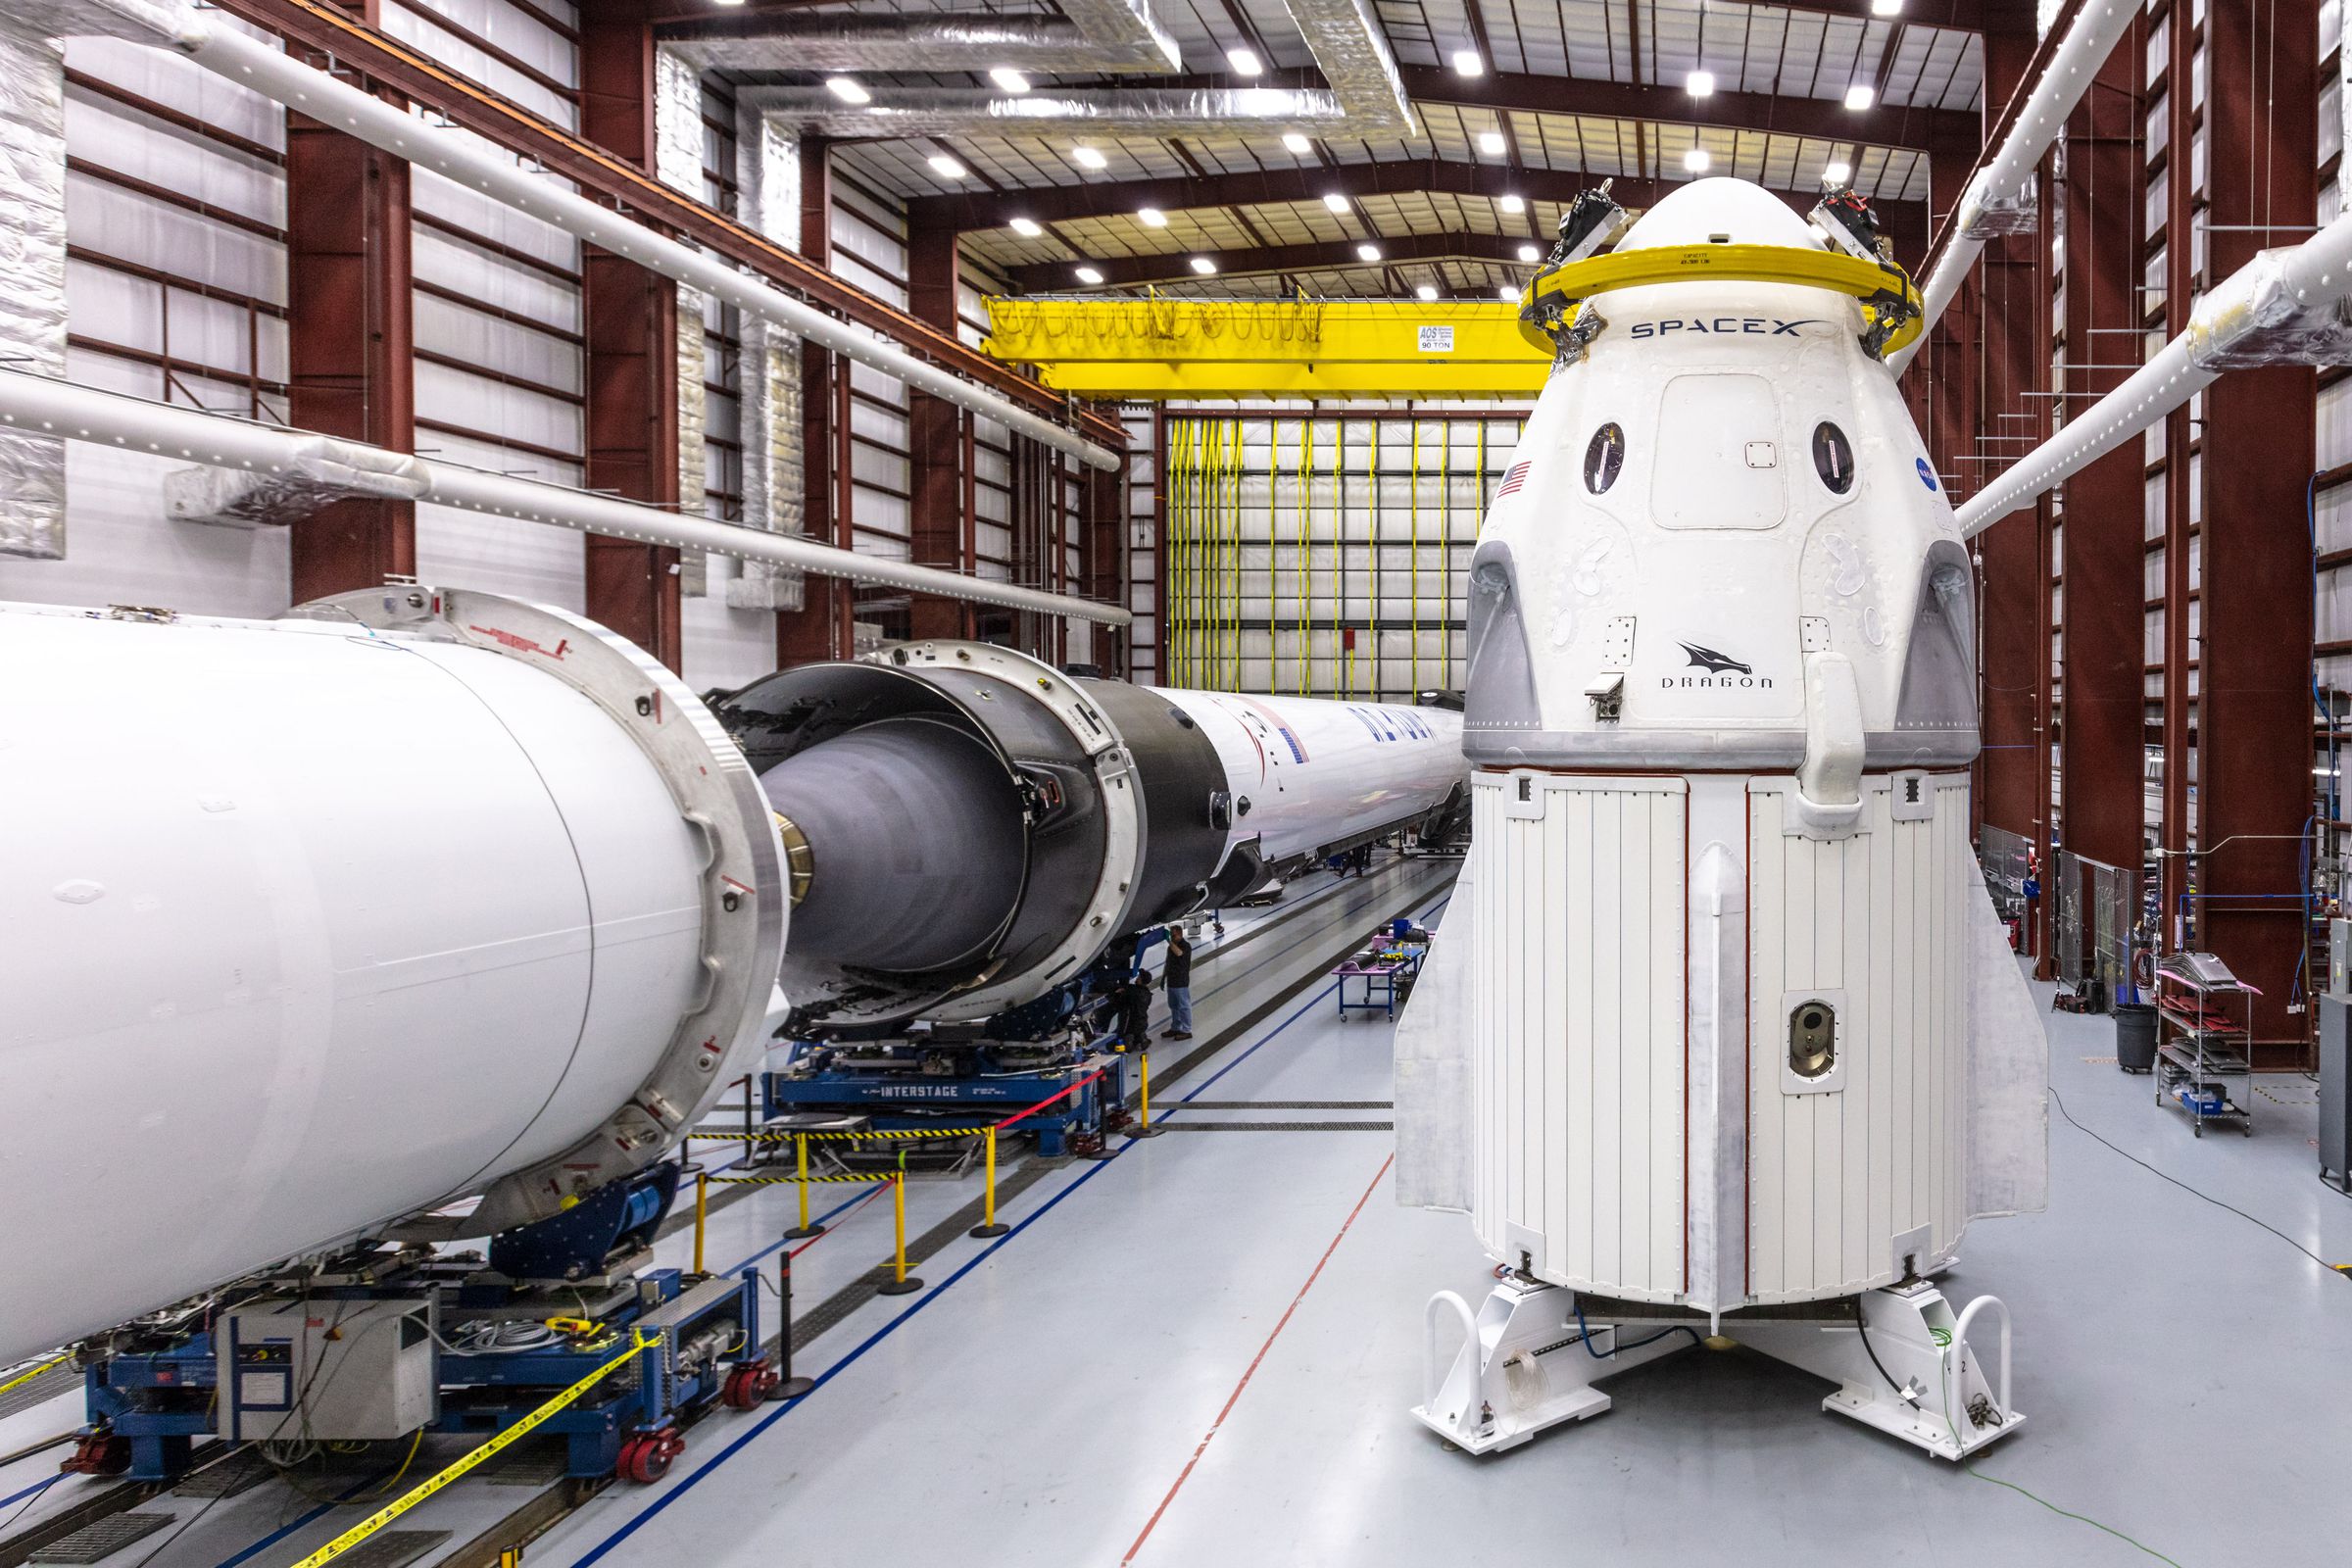 SpaceX’s Crew Dragon capsule, which flew during its first test flight in March